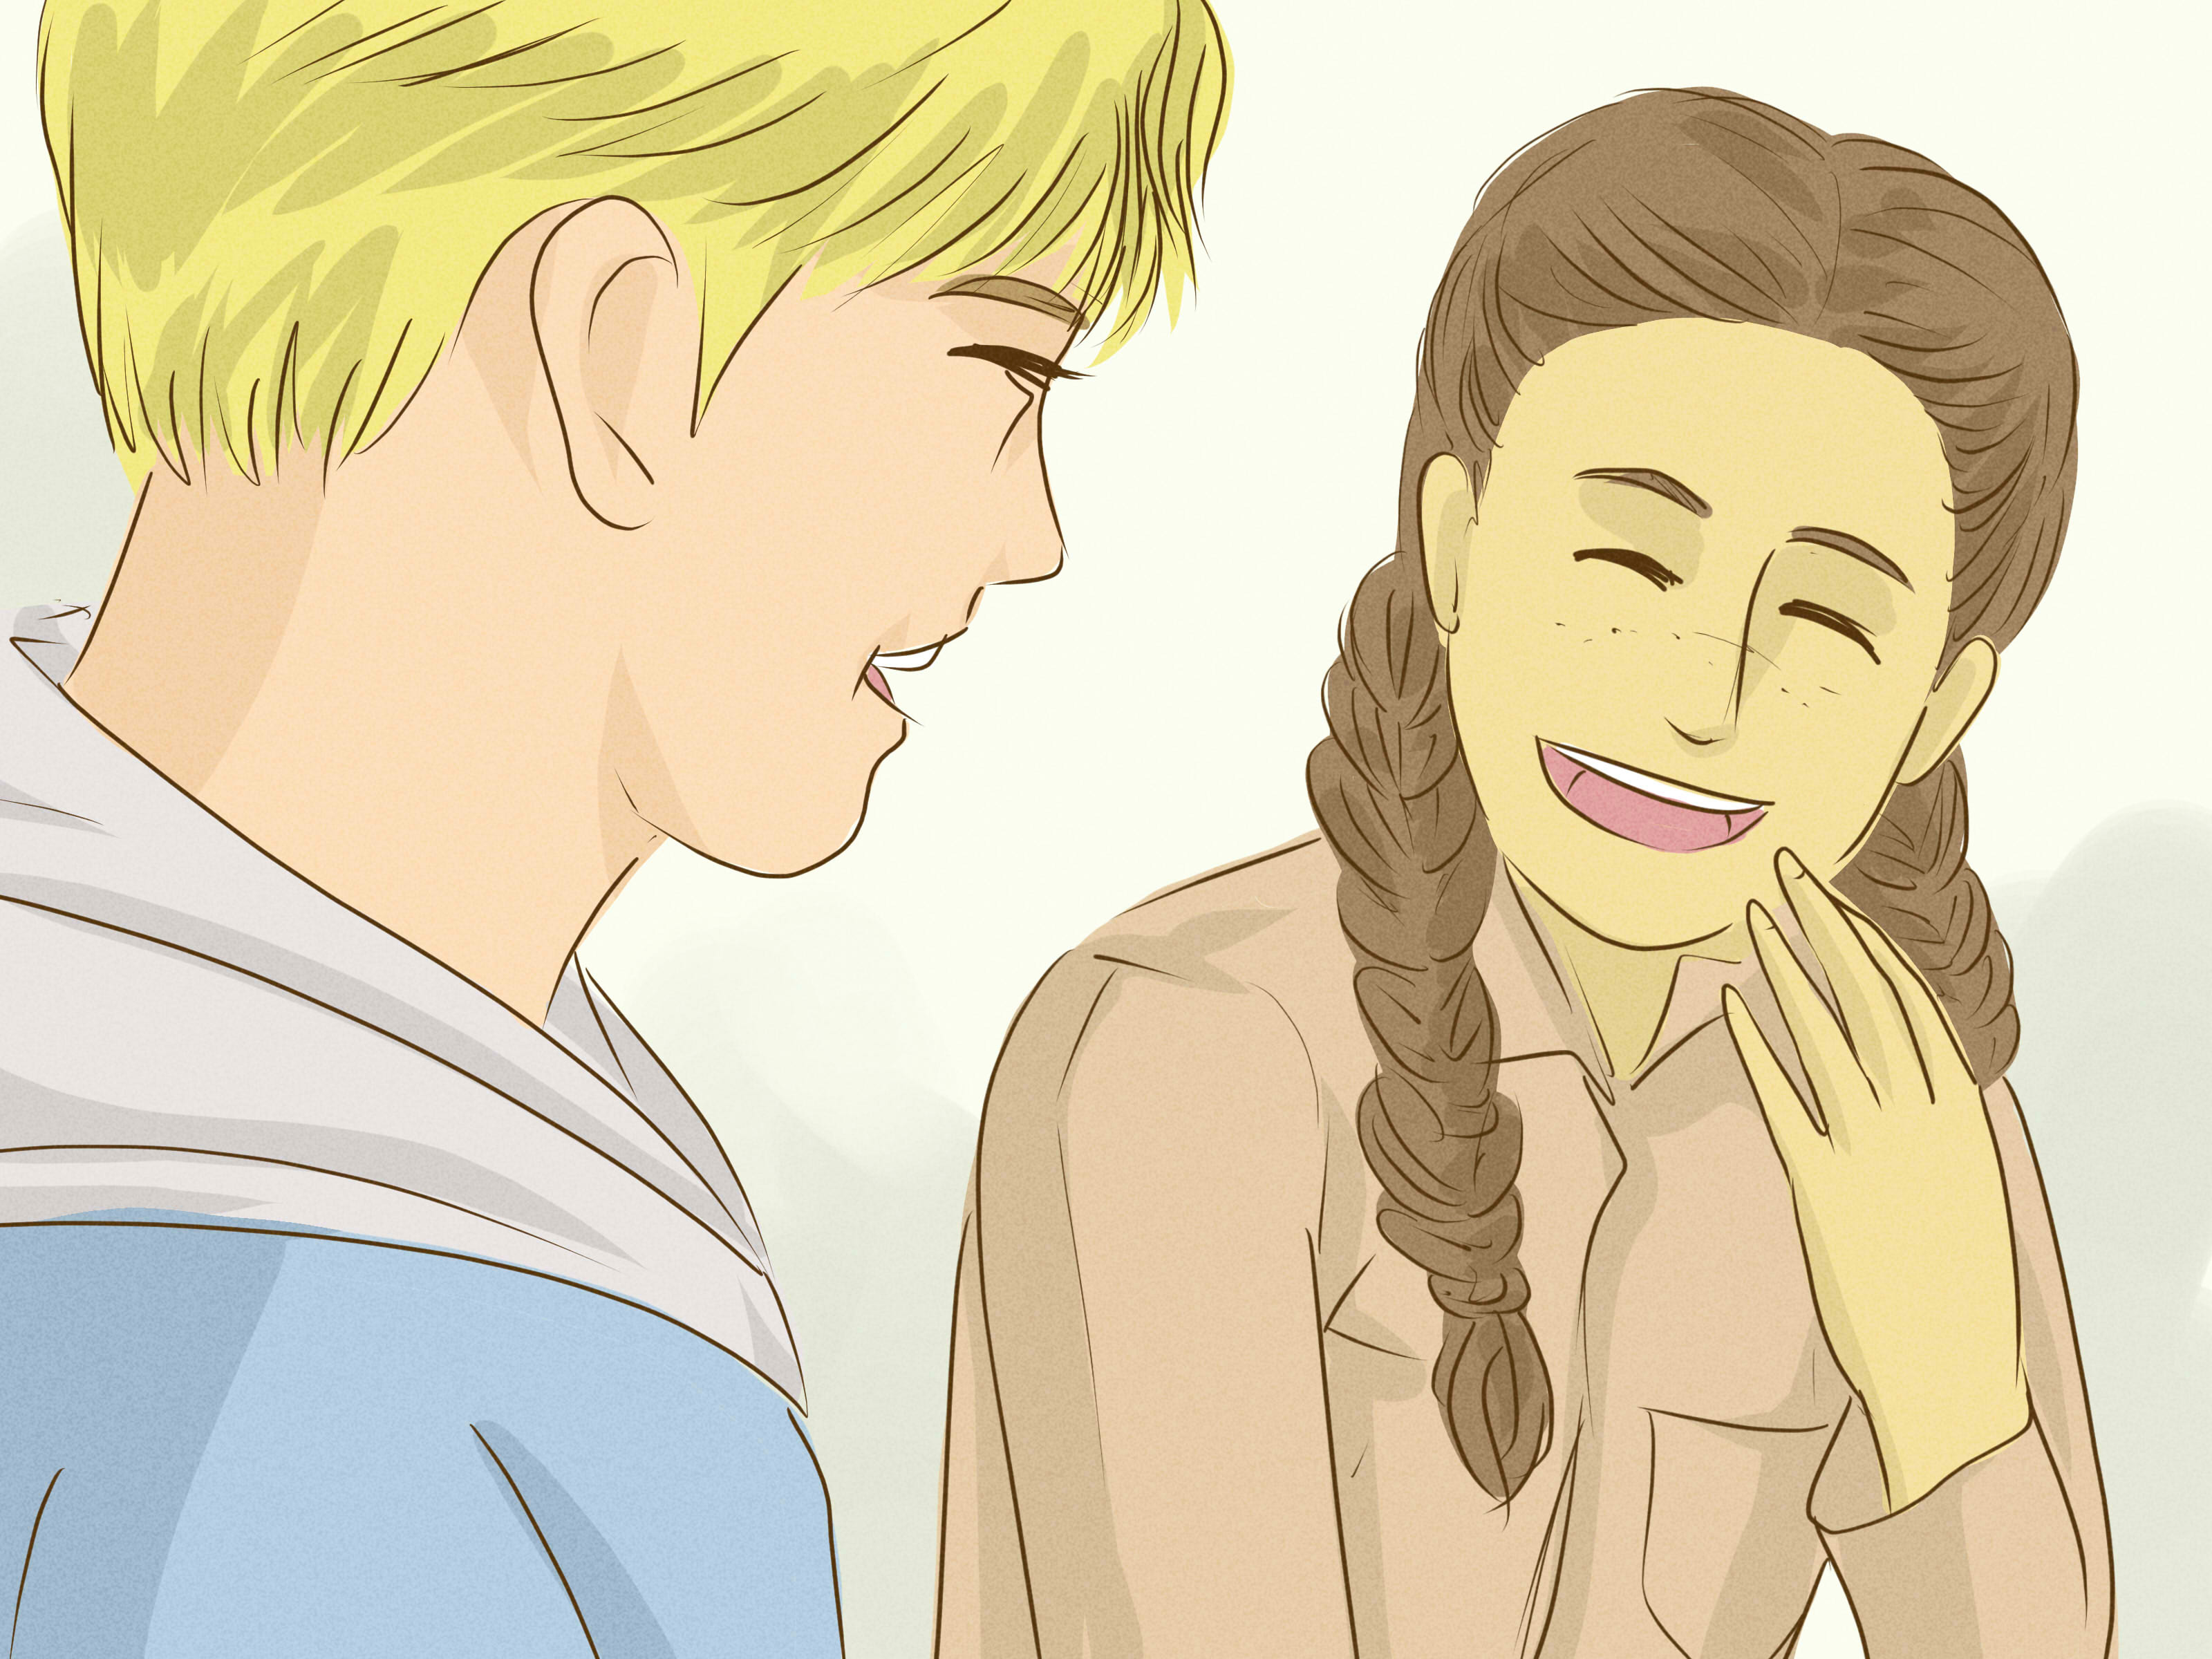 How To Get A Girlfriend With Pictures Wikihow